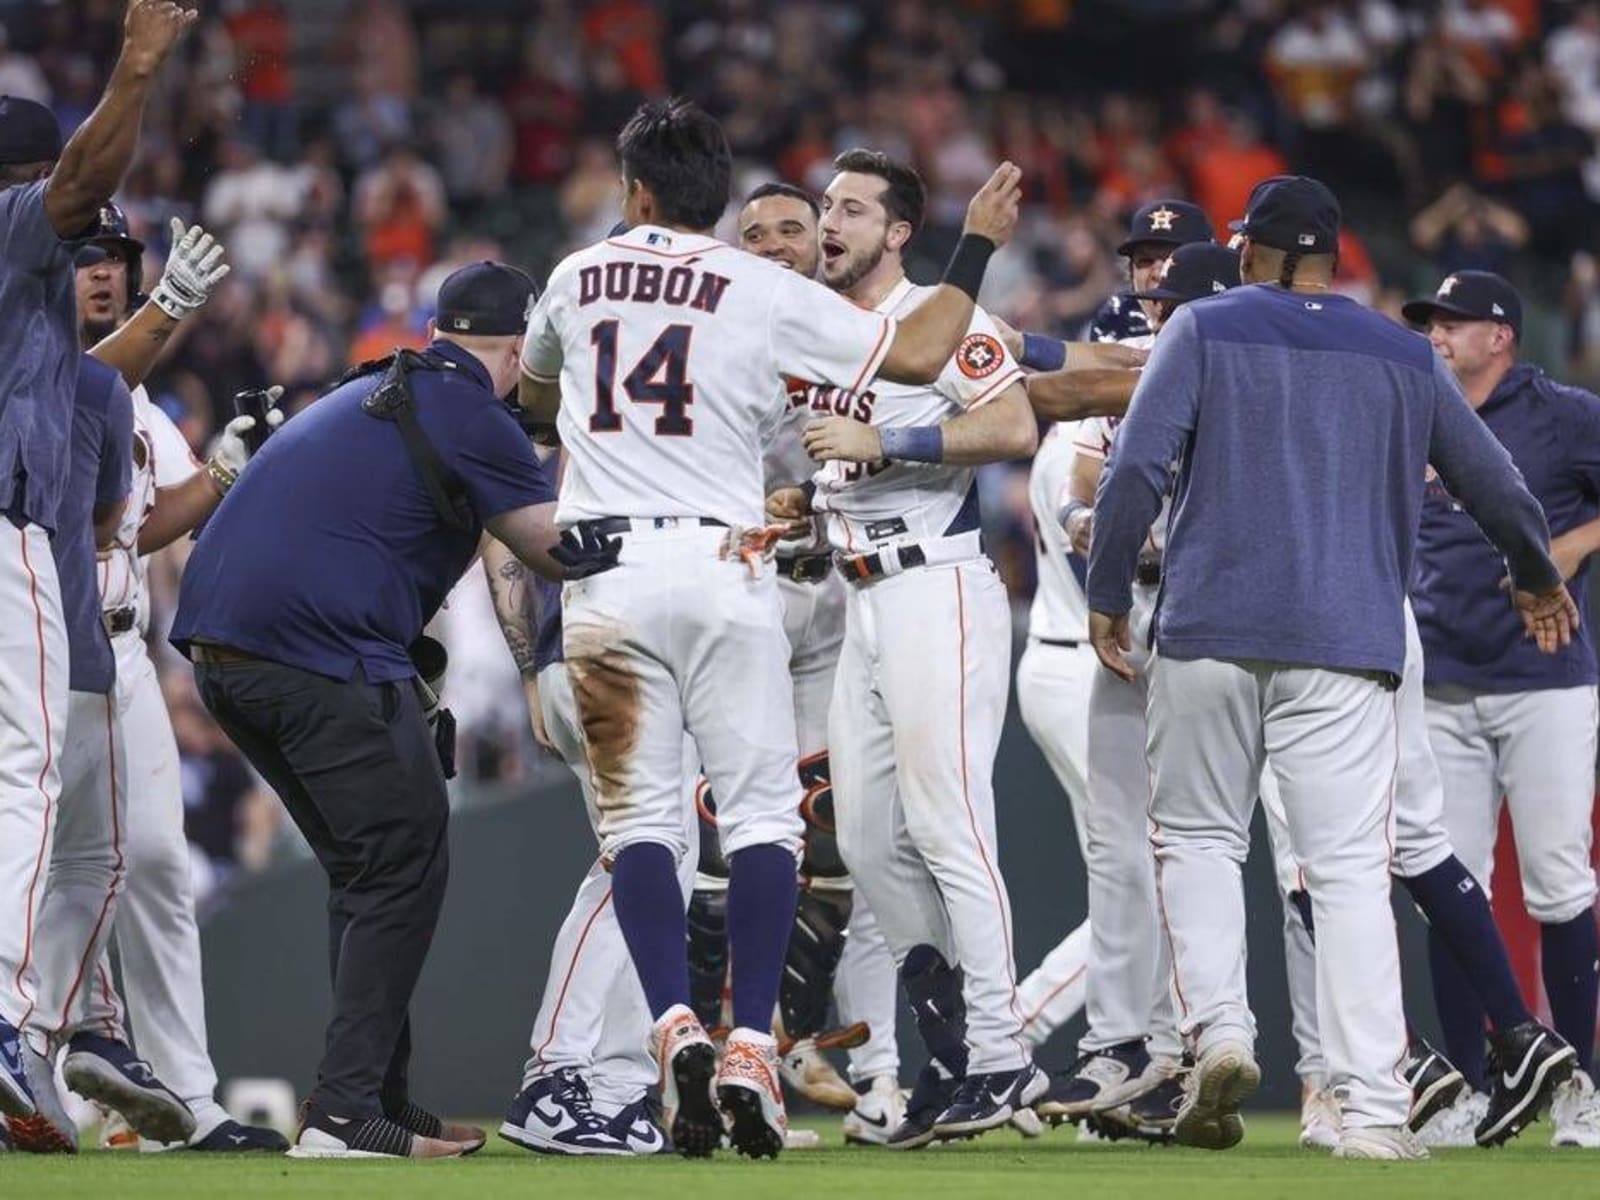 MLB roundup: Astros score four in ninth to stun Cubs